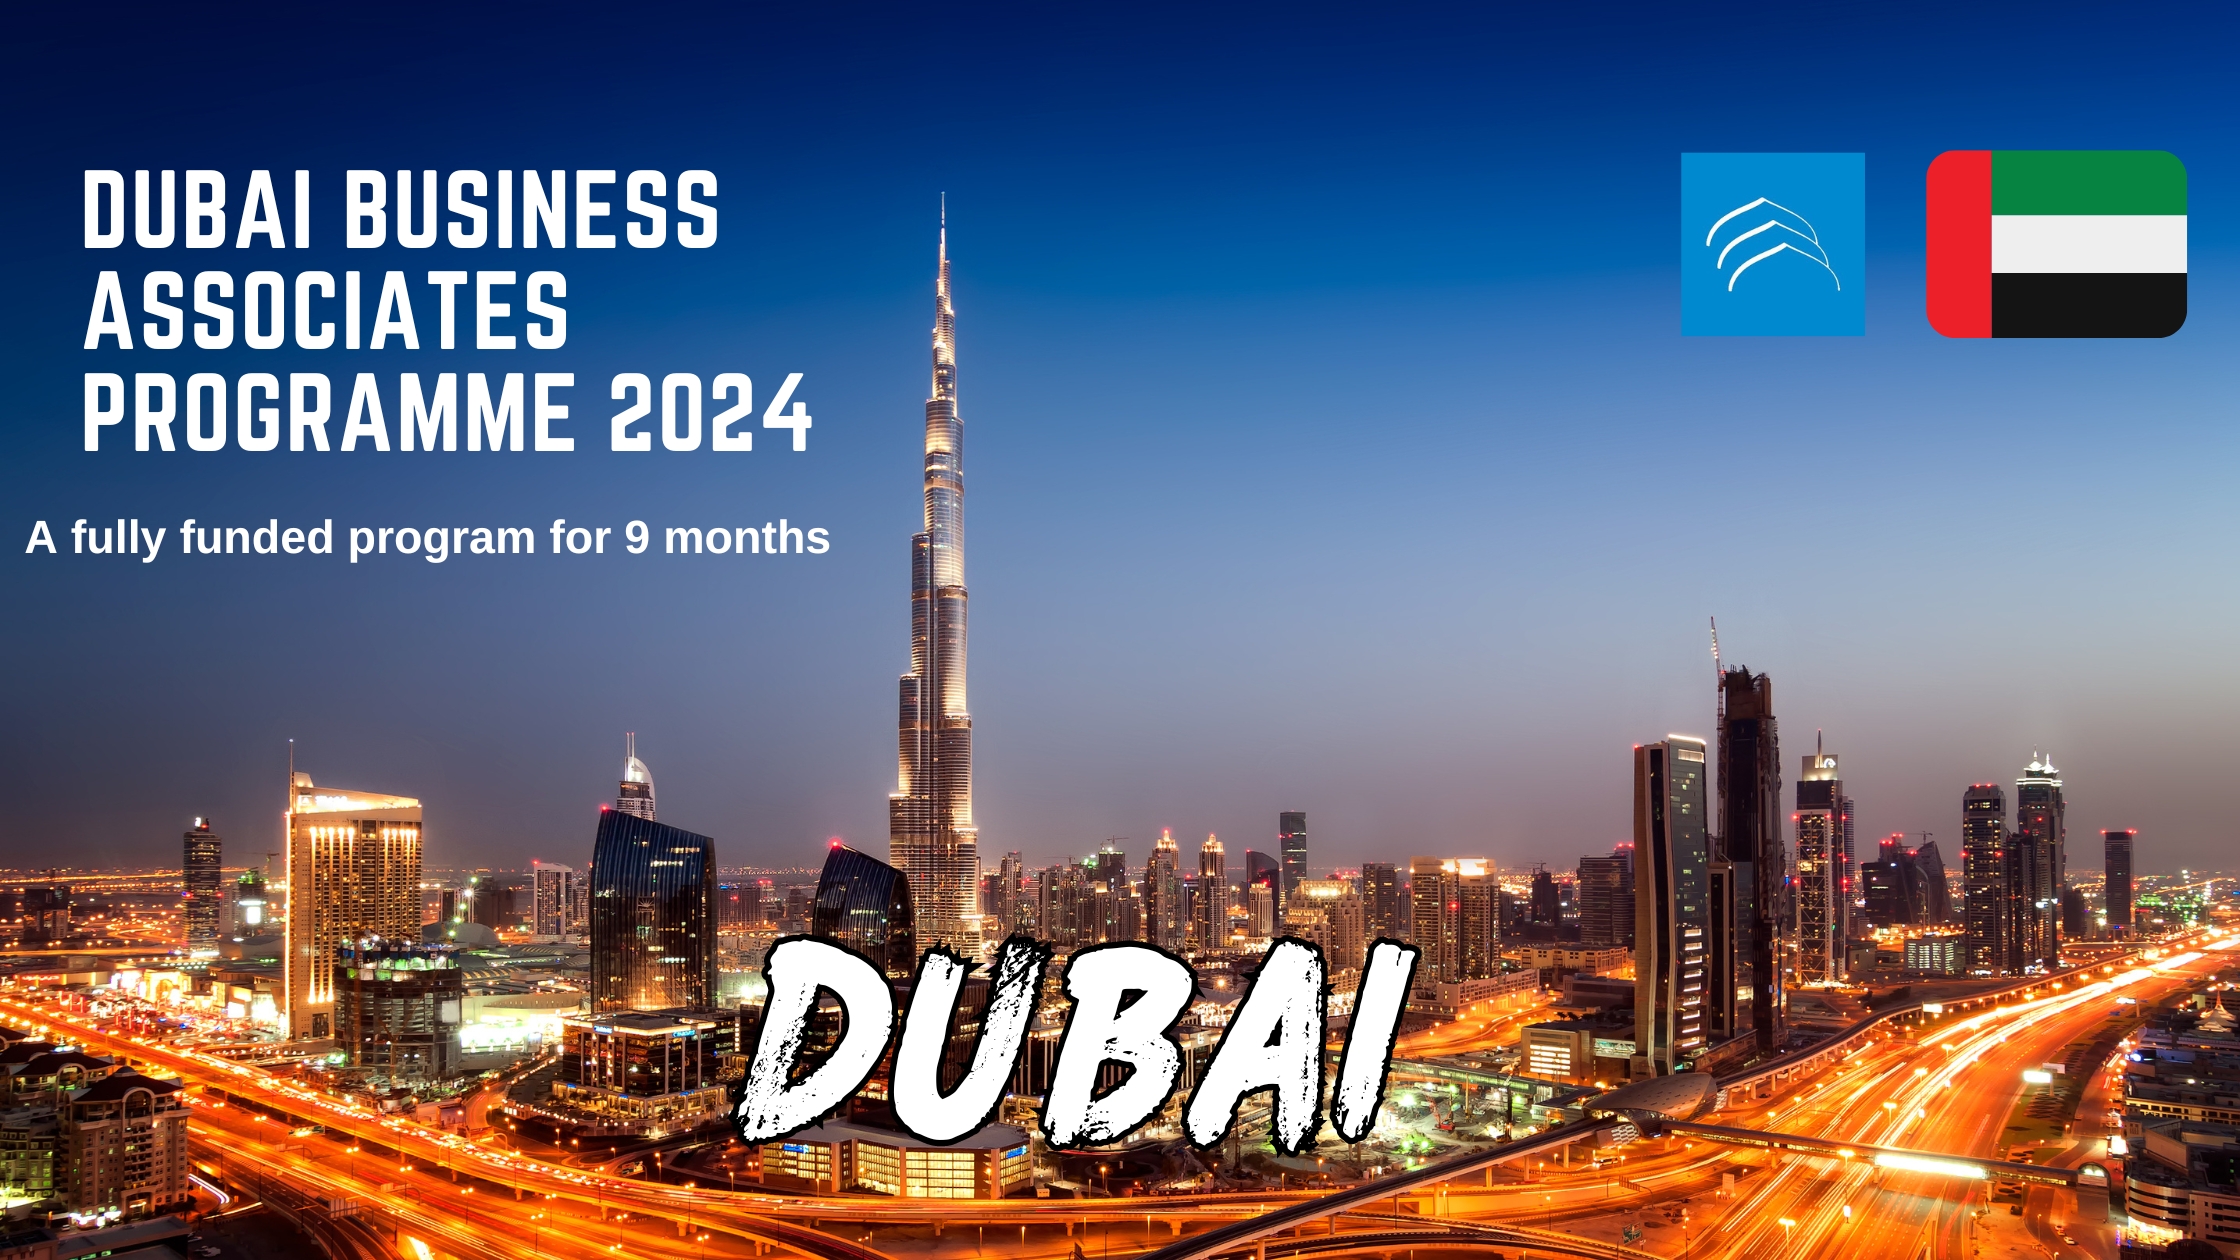 The Dubai Business Associates Programme: Your Gateway to Global Business and Transformation - FULLY FUNDED